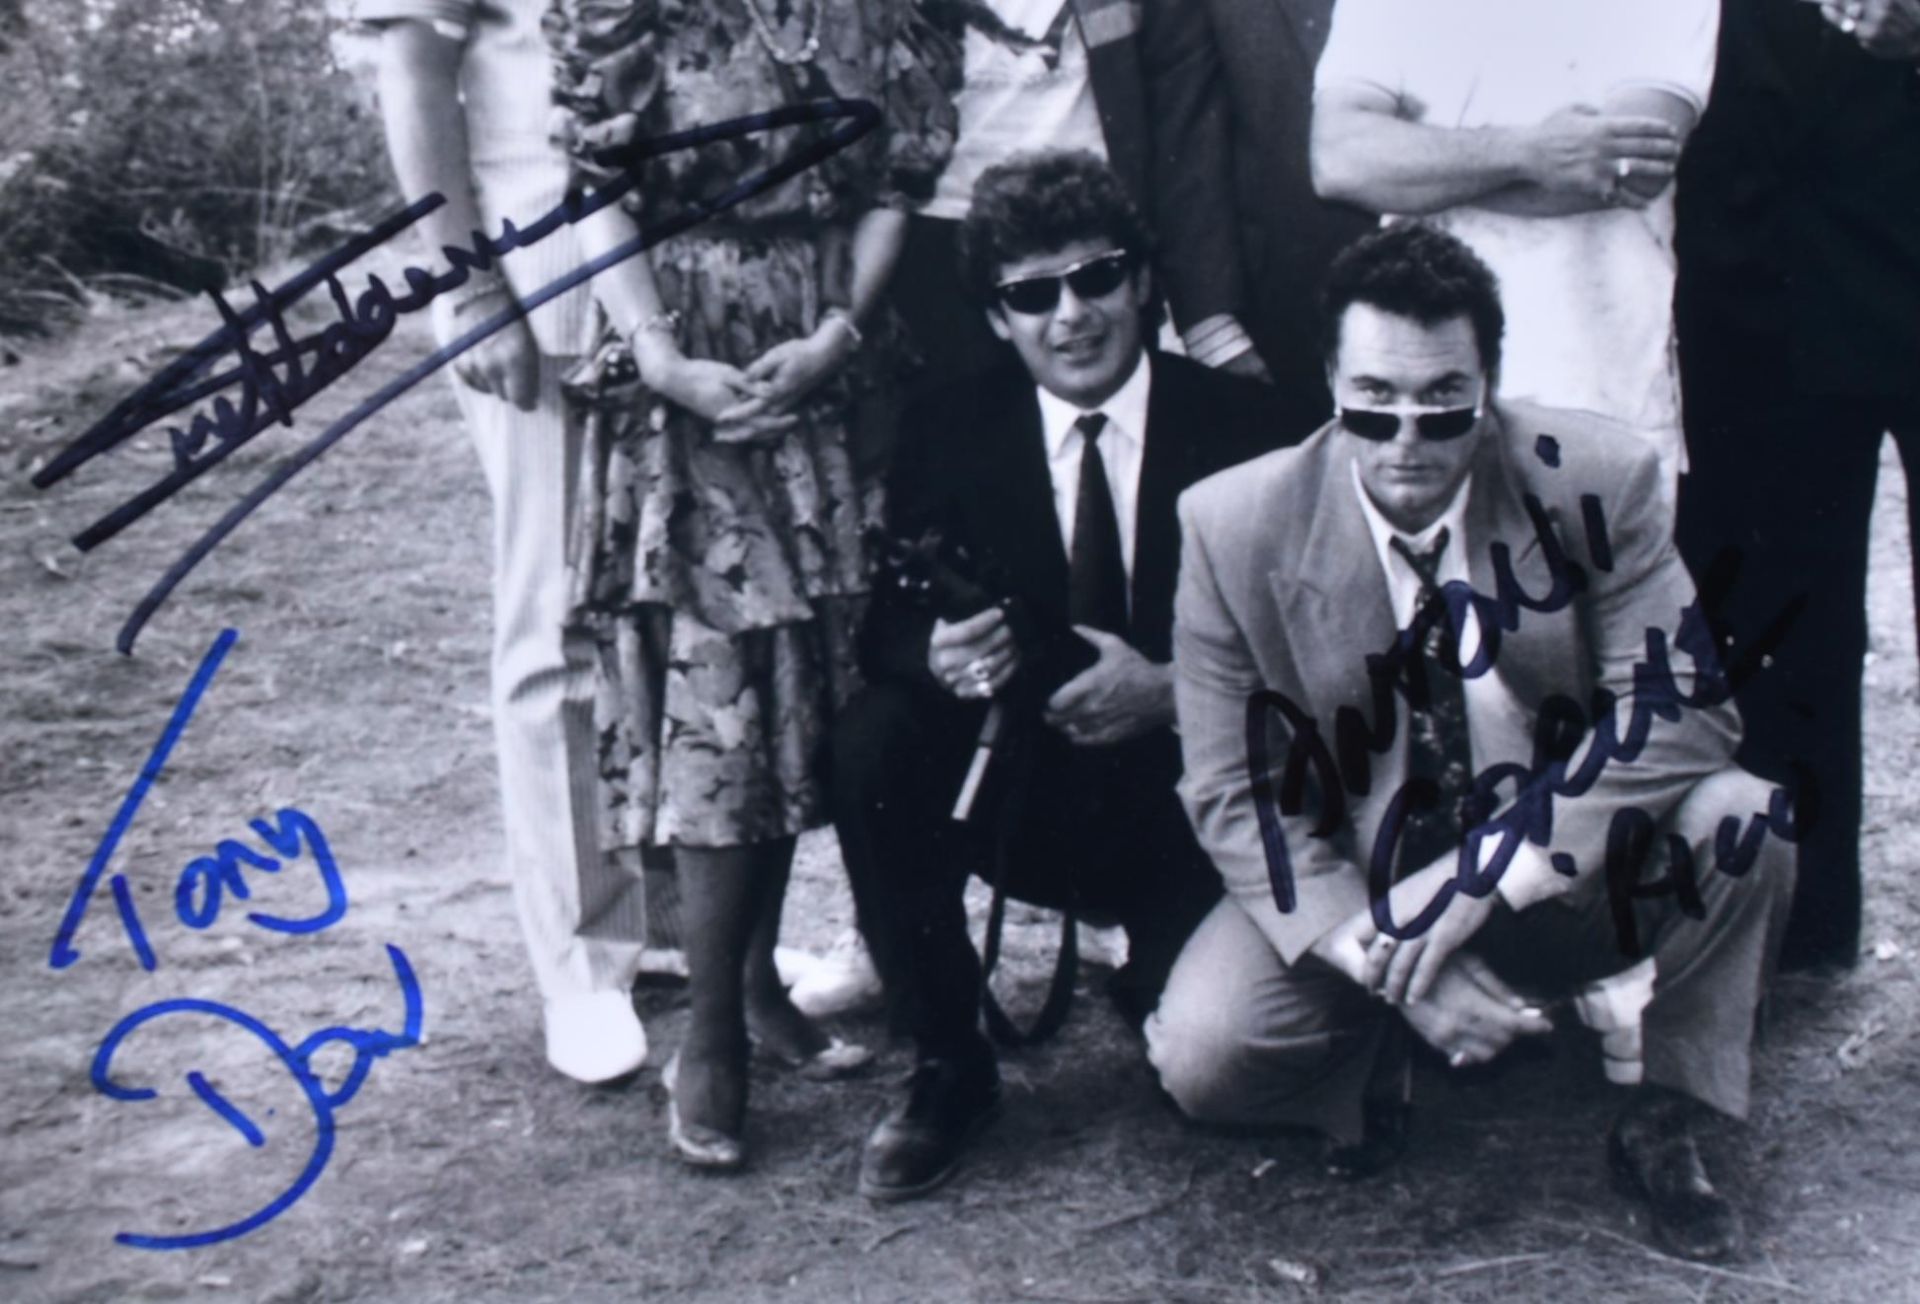 ONLY FOOLS & HORSES - MIAMI TWICE (1991) - TRIPLE SIGNED 8X10" PHOTO - Image 2 of 3